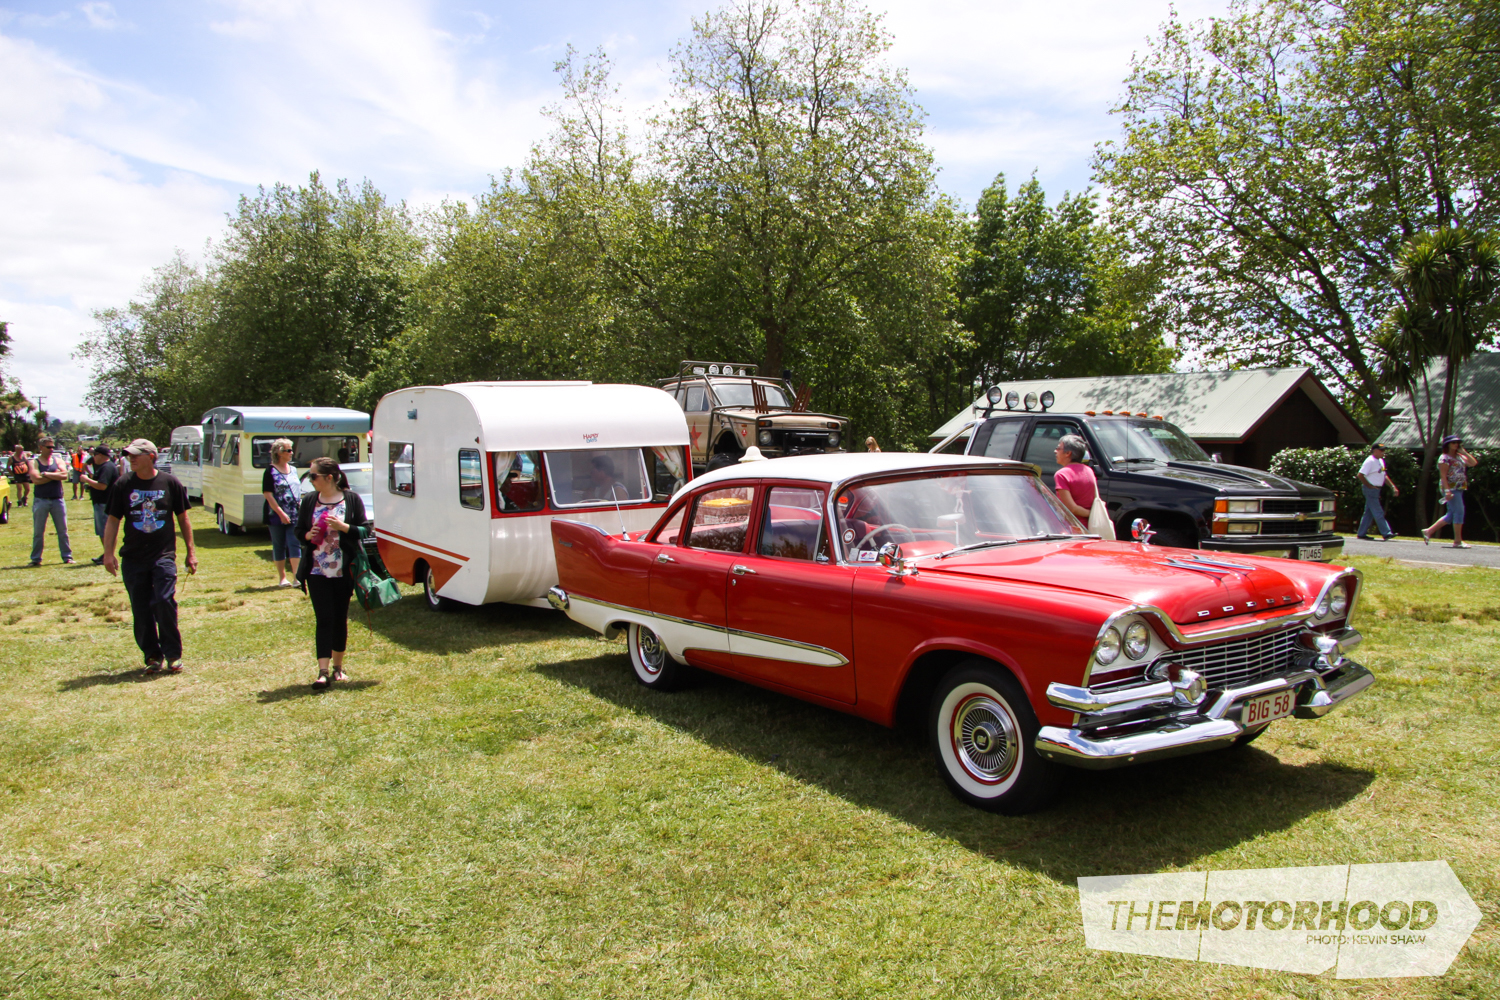 Caravan owners were more than willing to take showgoers on a tour of their caravans